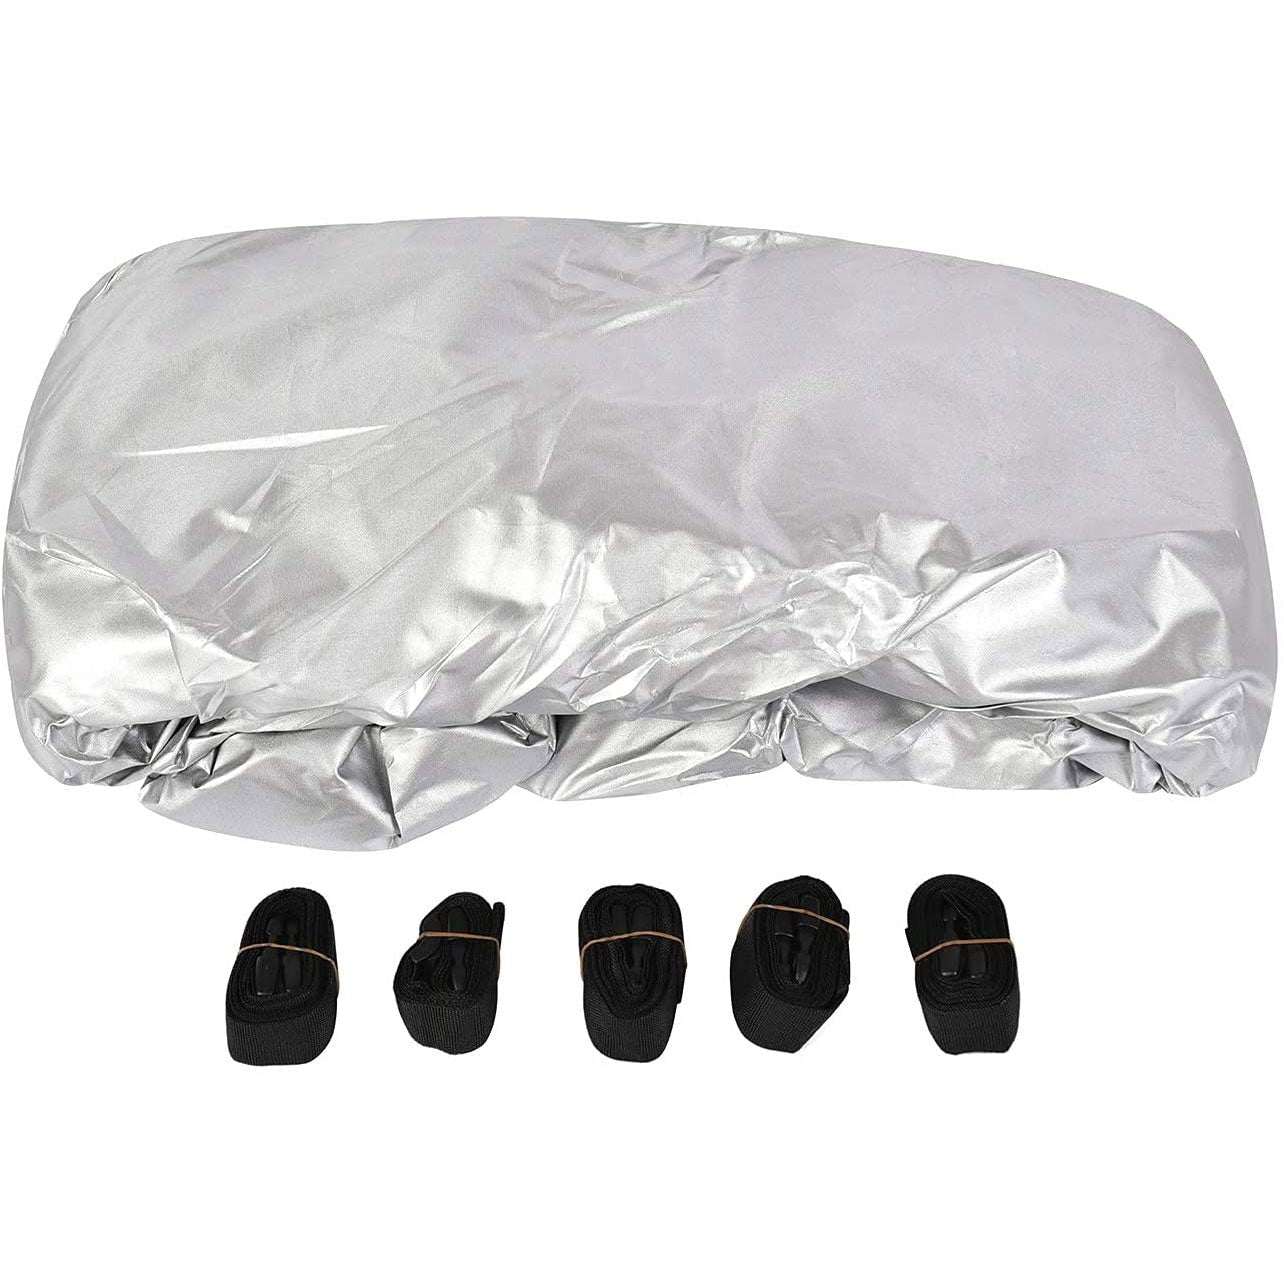 Trailerable Runabout Boat Cover Siver